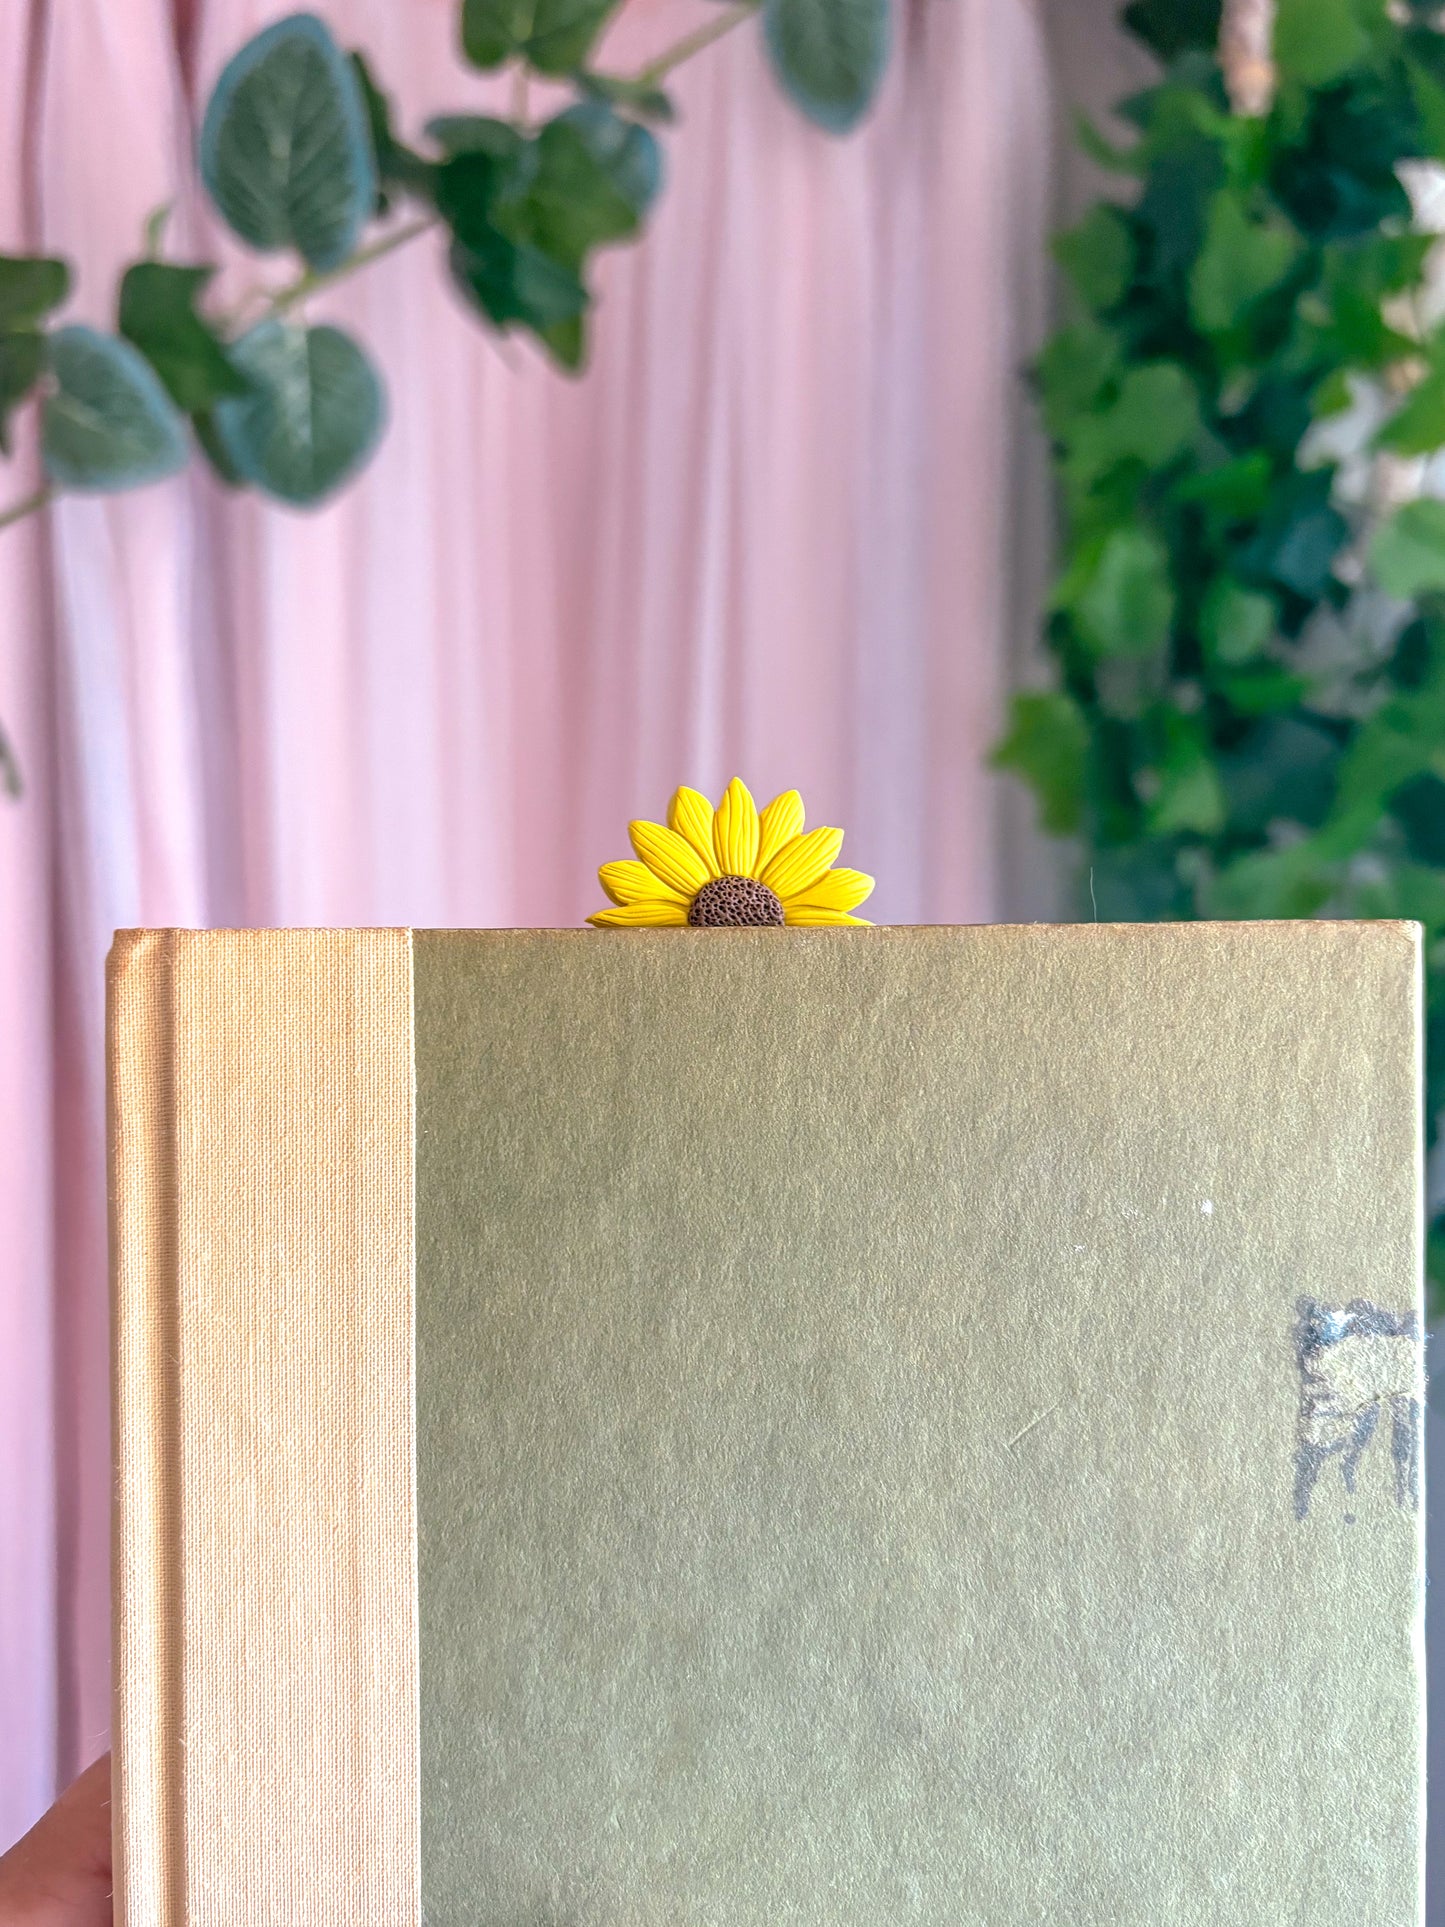 Sunflower Paperclip Bookmark